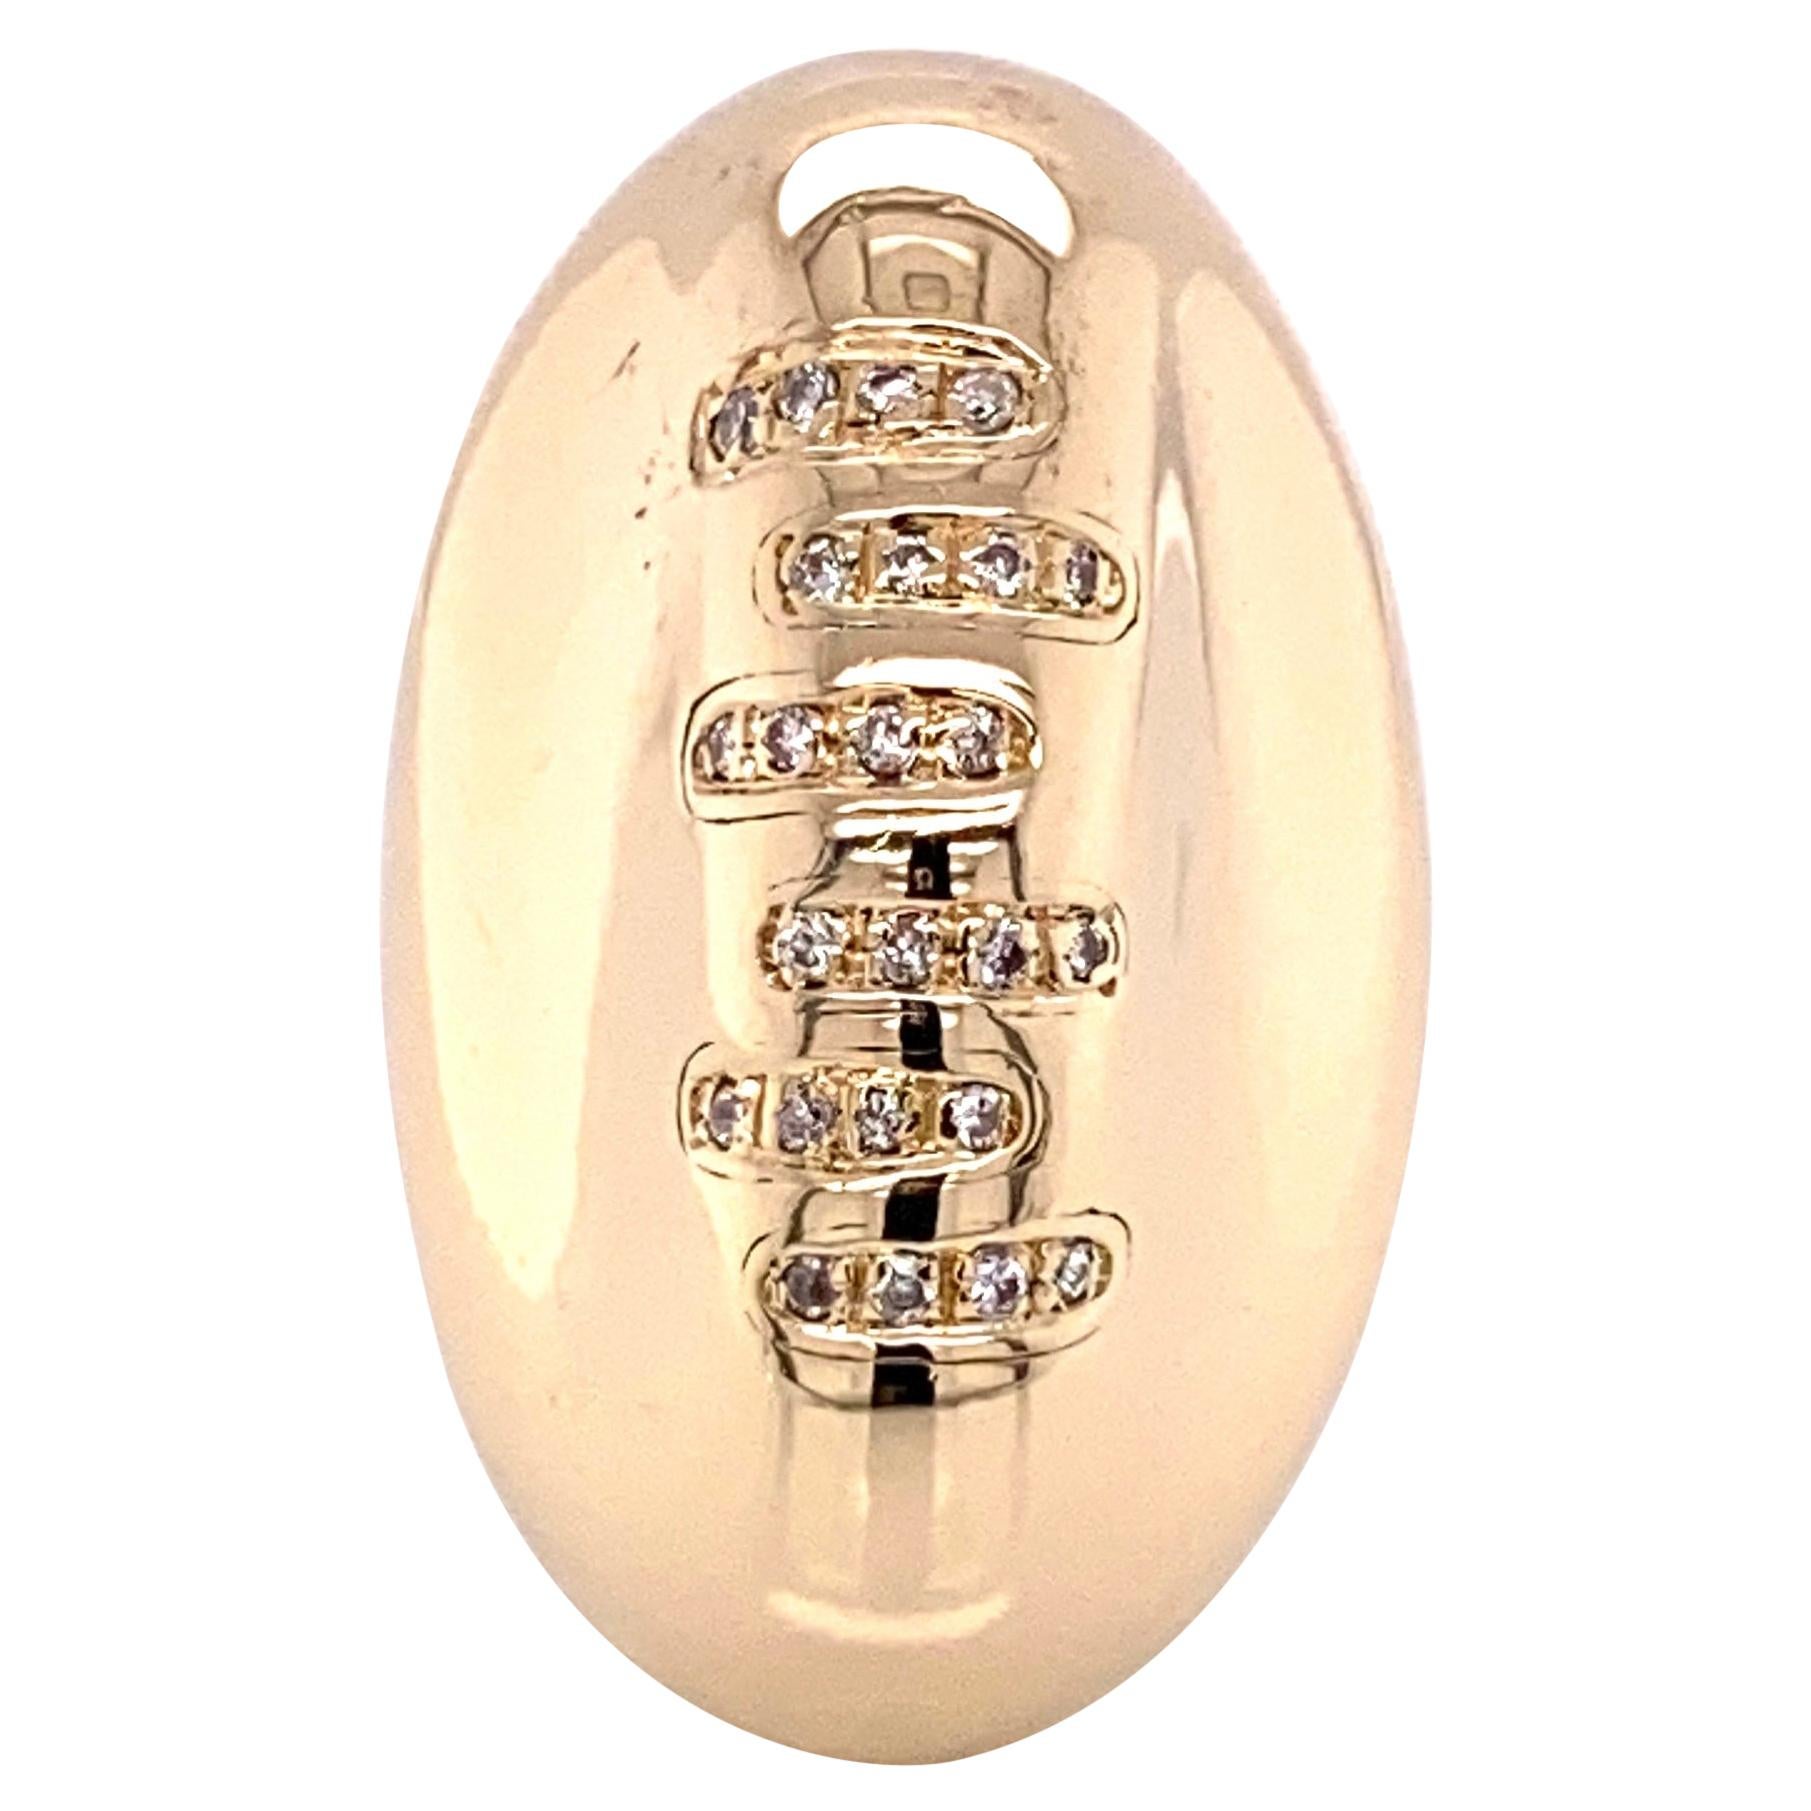 Men's Gold Football Ring with Diamond Laces Estate Fine Jewelry For Sale